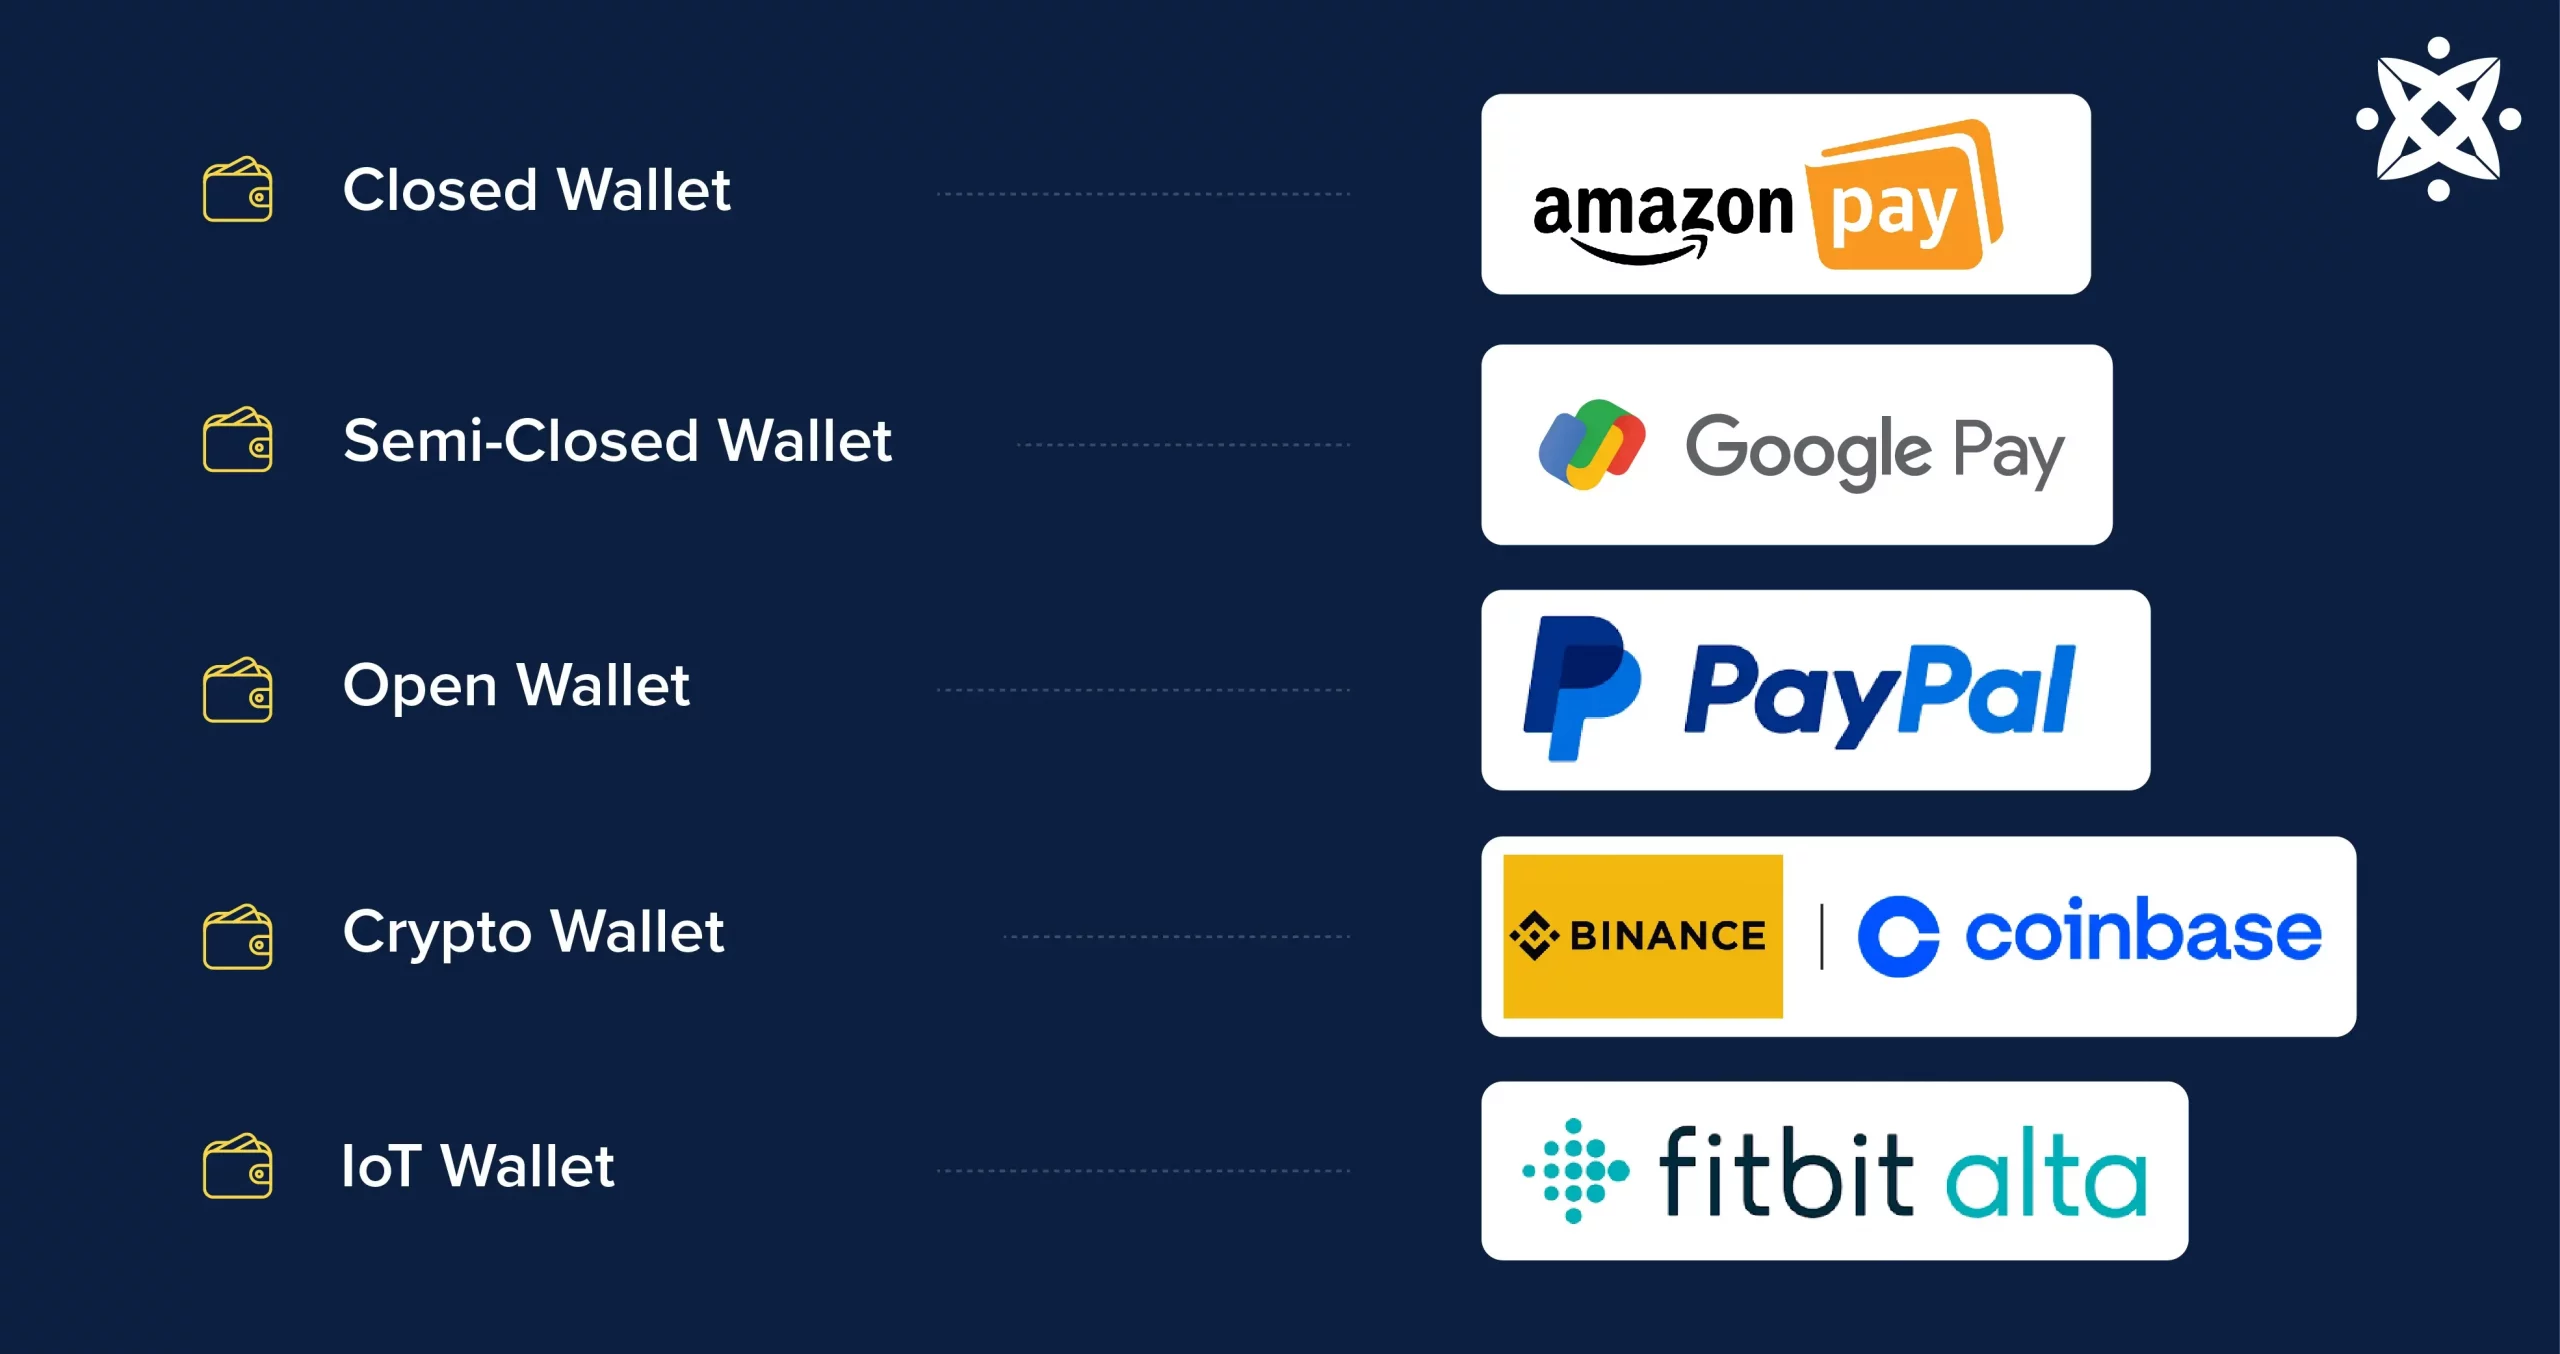 Image showing Types of E-Wallets, which are: Closed wallet, Semi-closed wallet, Open wallet, Crypto Wallet, and IoT Wallet